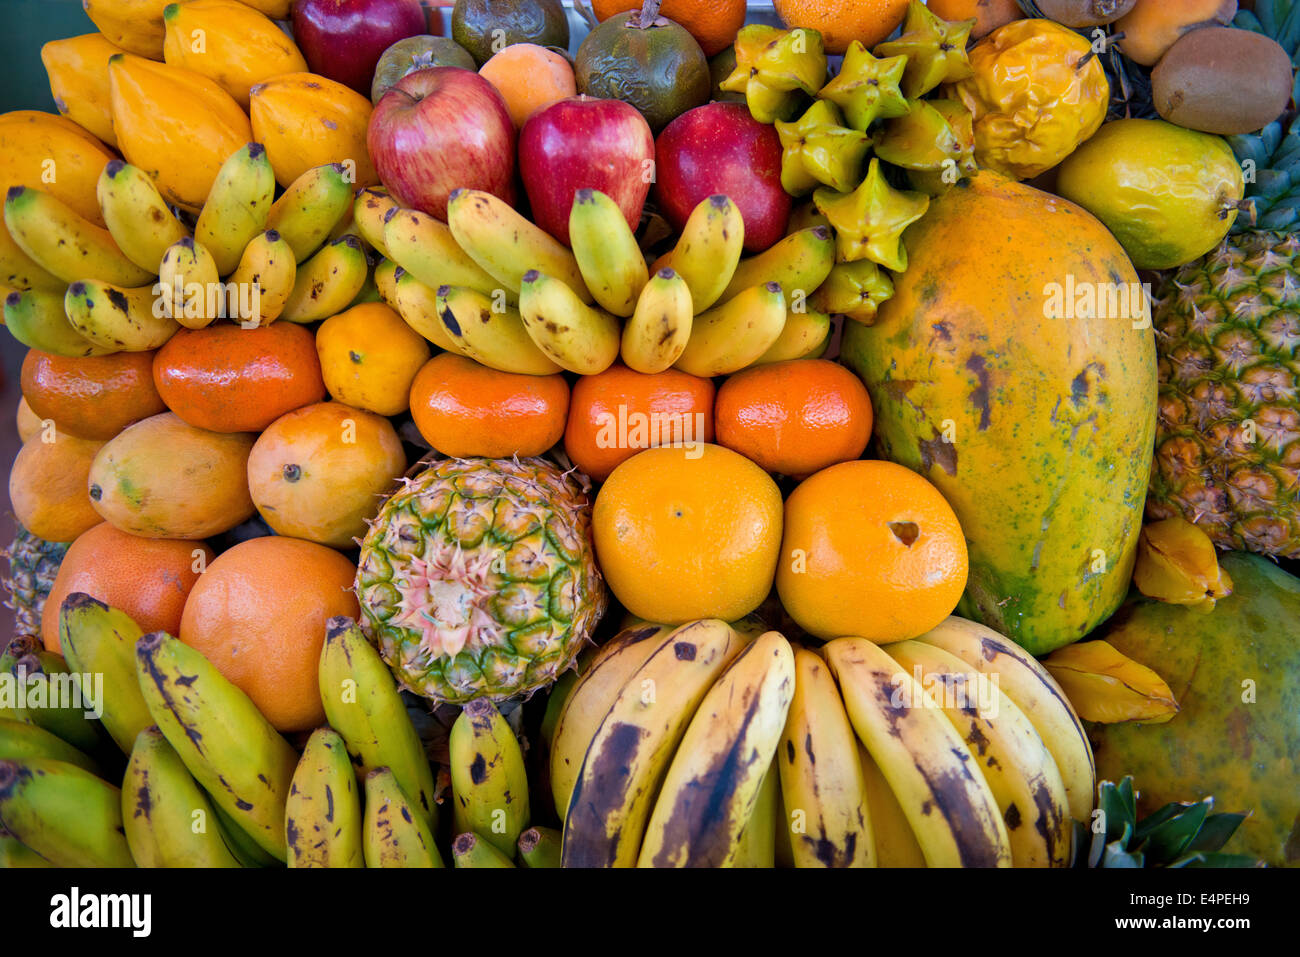 Various tropical fruits, fruit for sale, Peru Stock Photo